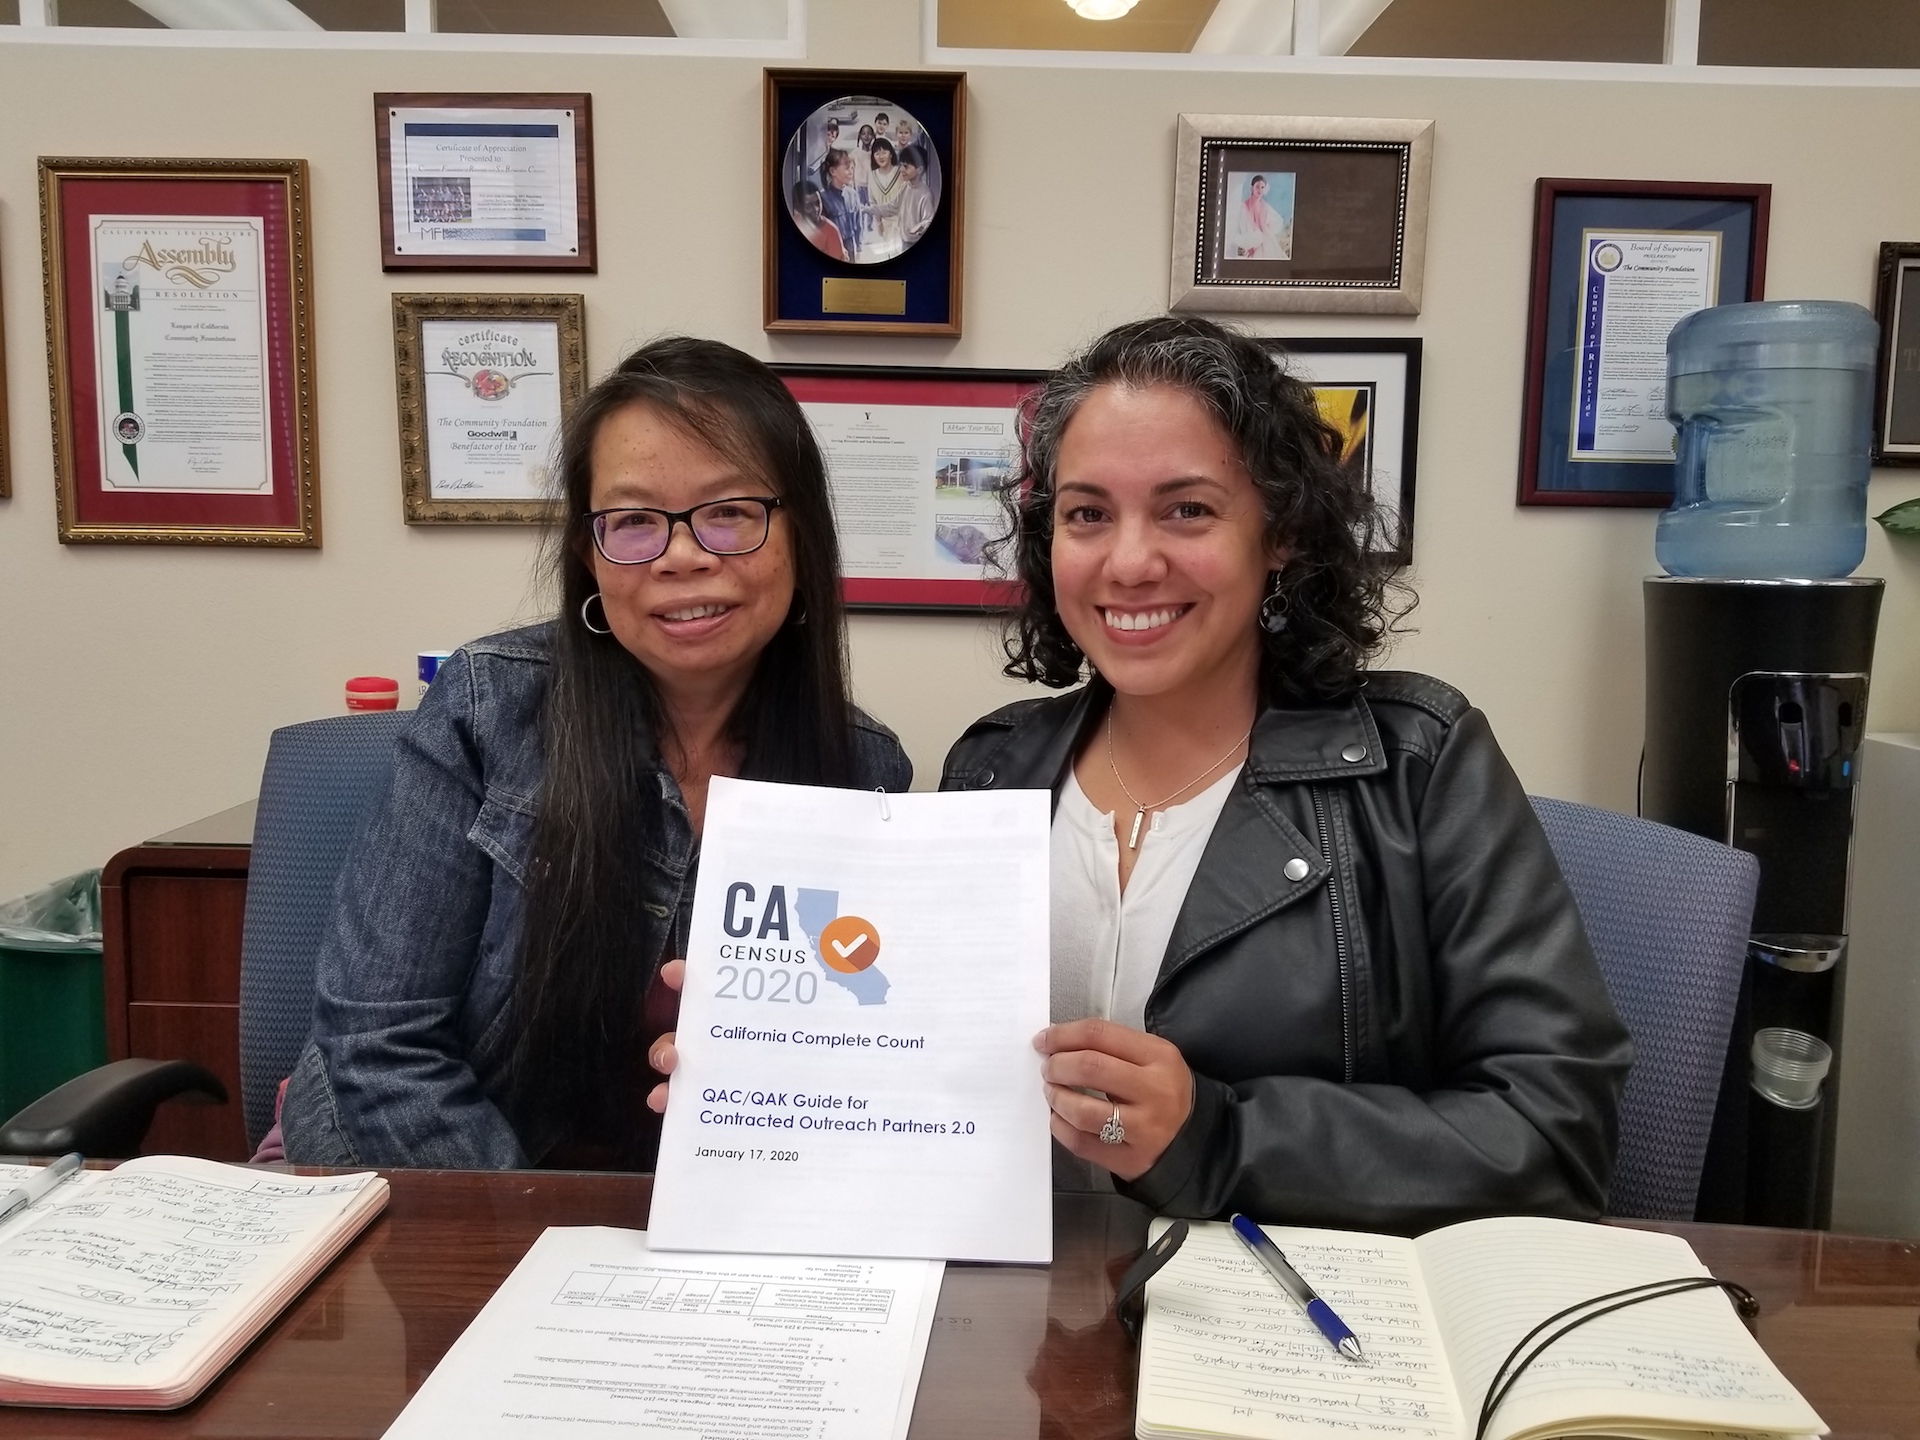 Celia Cudiamat and Margarita Luna at a meeting of the Inland Empire Census Funders Table, a project of the Funders Alliance of San Bernardino & Riverside Counties.